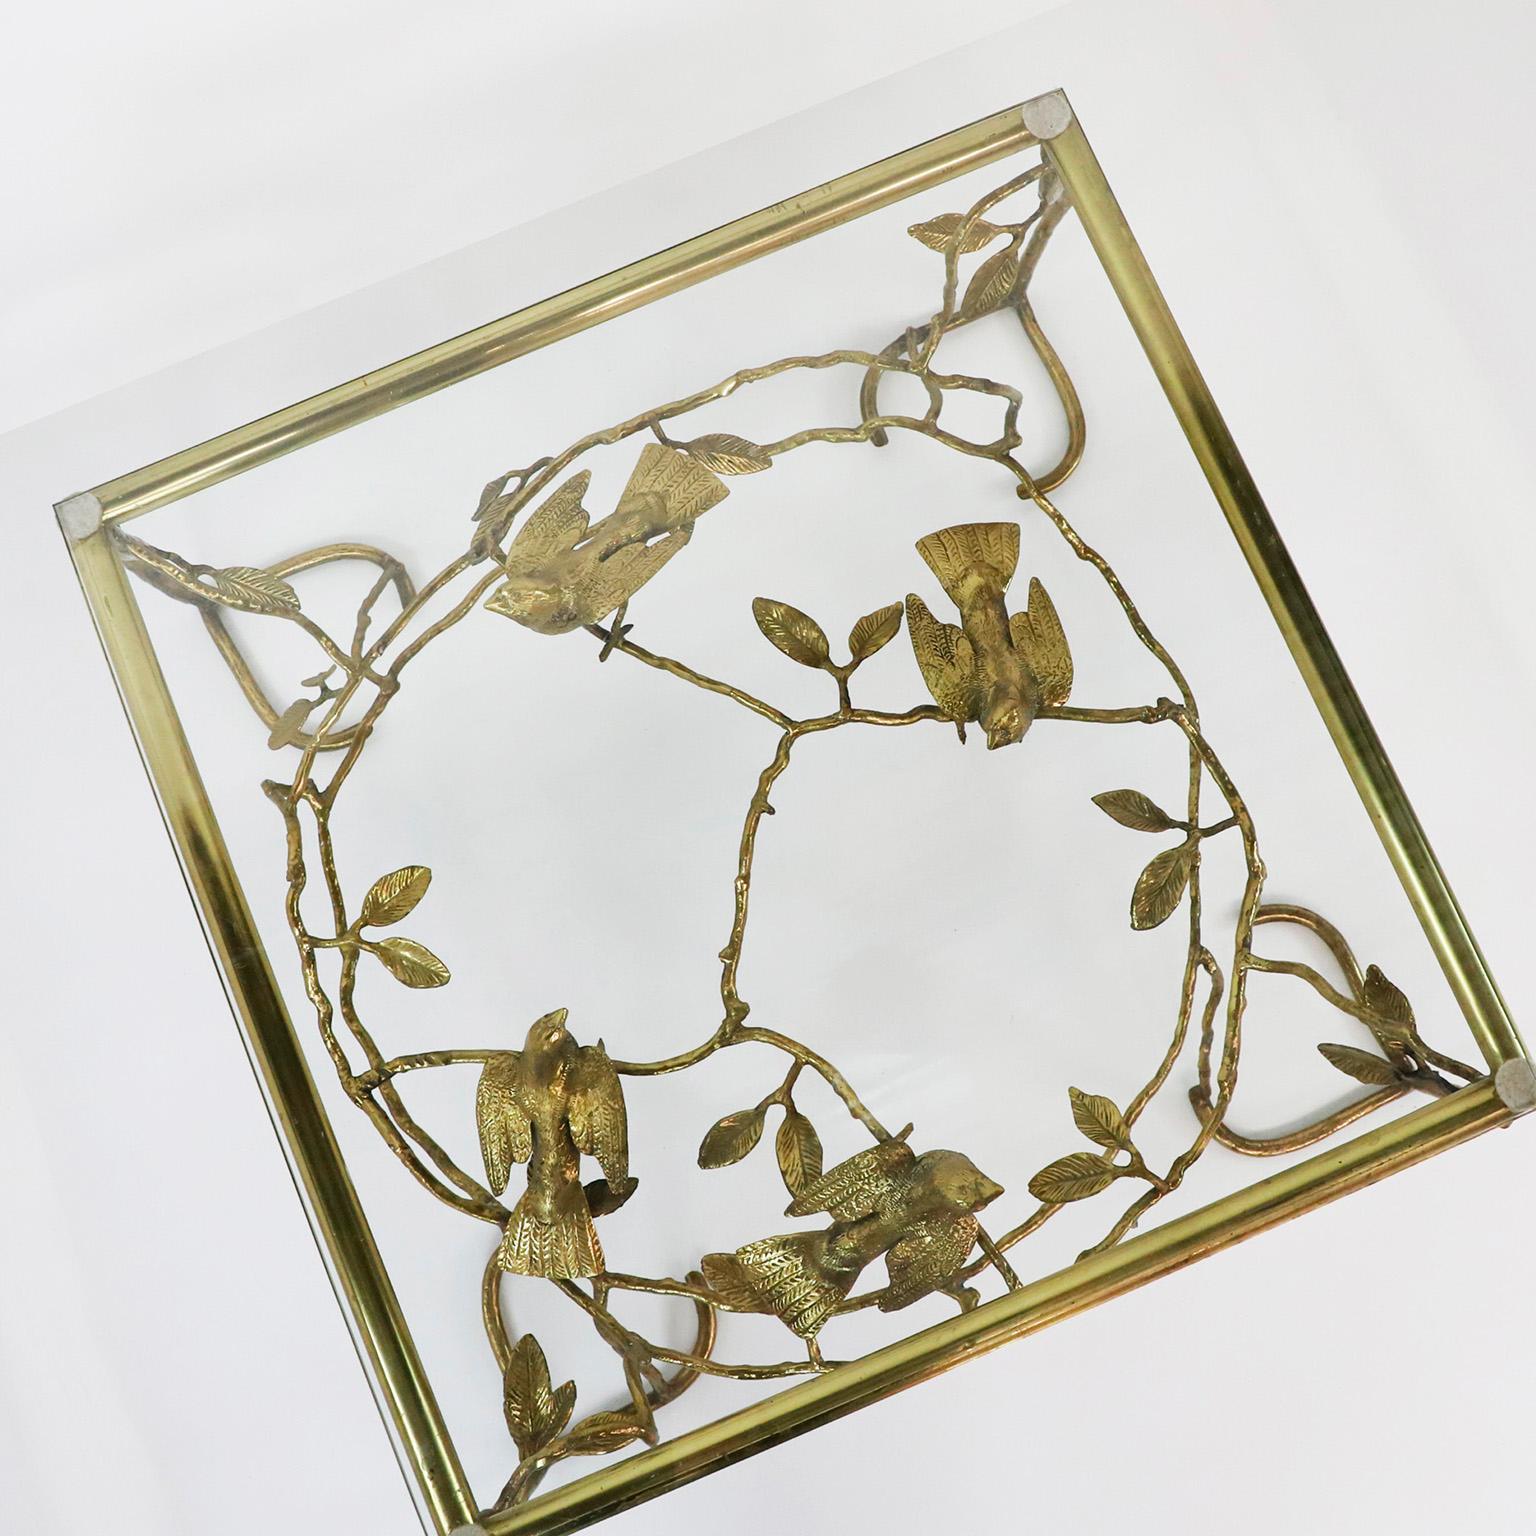 Other Tree Branches & Birds Table in the Style of Giacometti Made in Brass Handcrafted For Sale